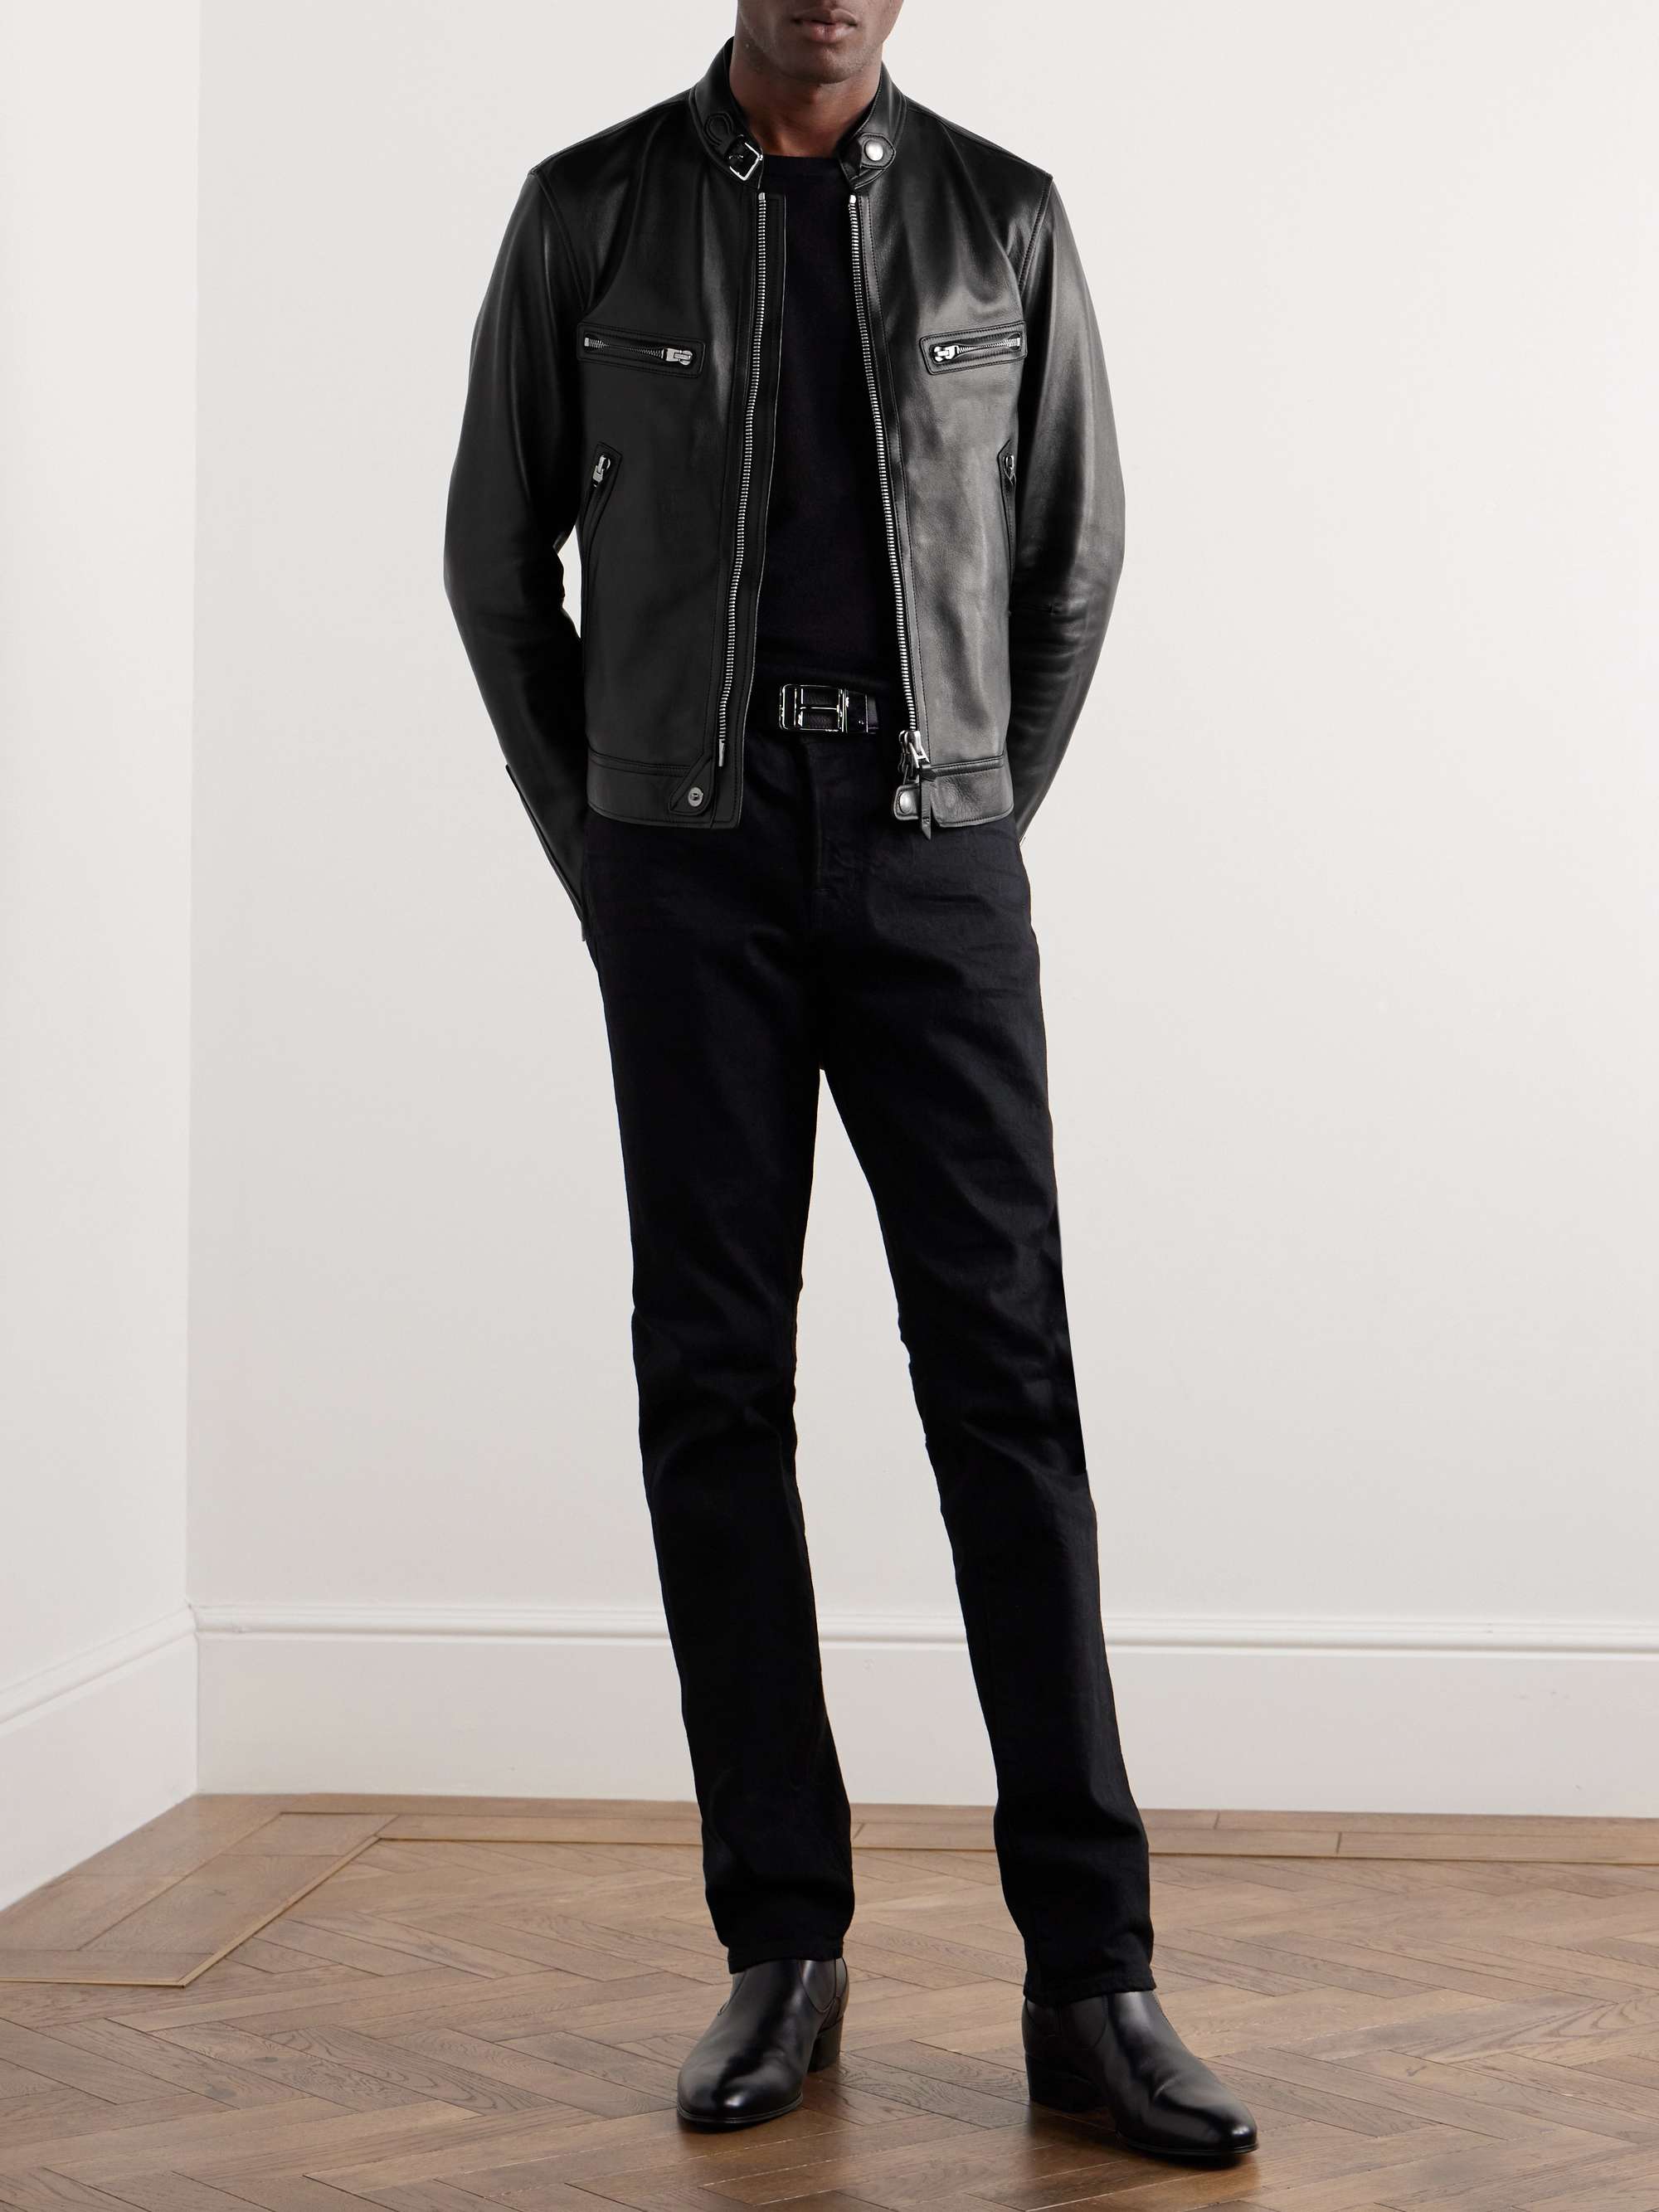 TOM FORD - I designed this black leather motorcycle jacket for my